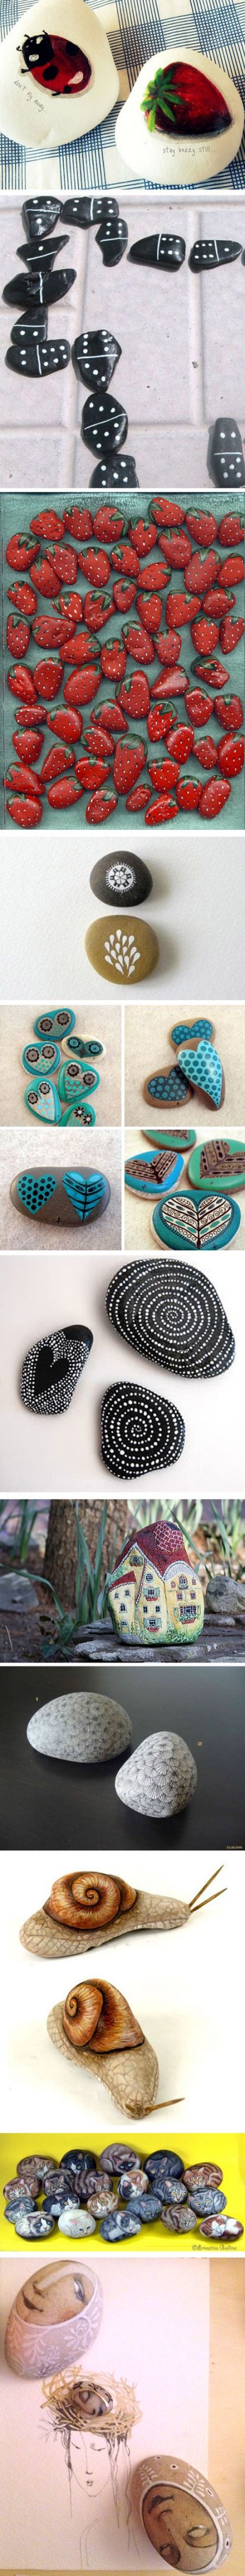 Painted pebbles - a great idea to entertain the kids on a rainy ...